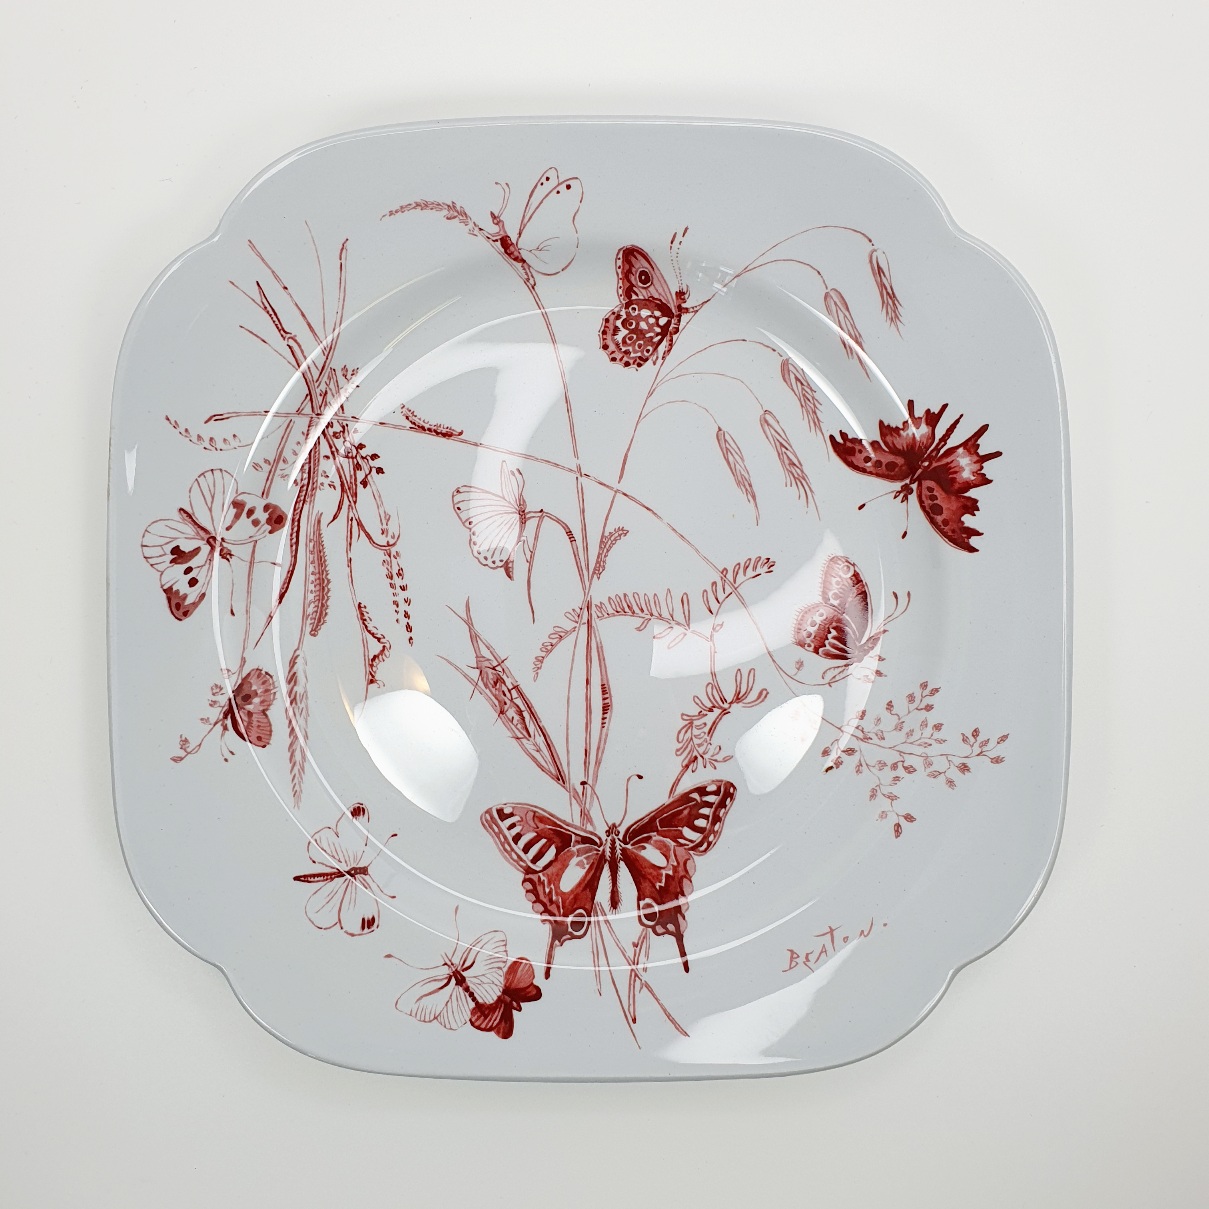 A Spode Plate designed by Cecil Beaton